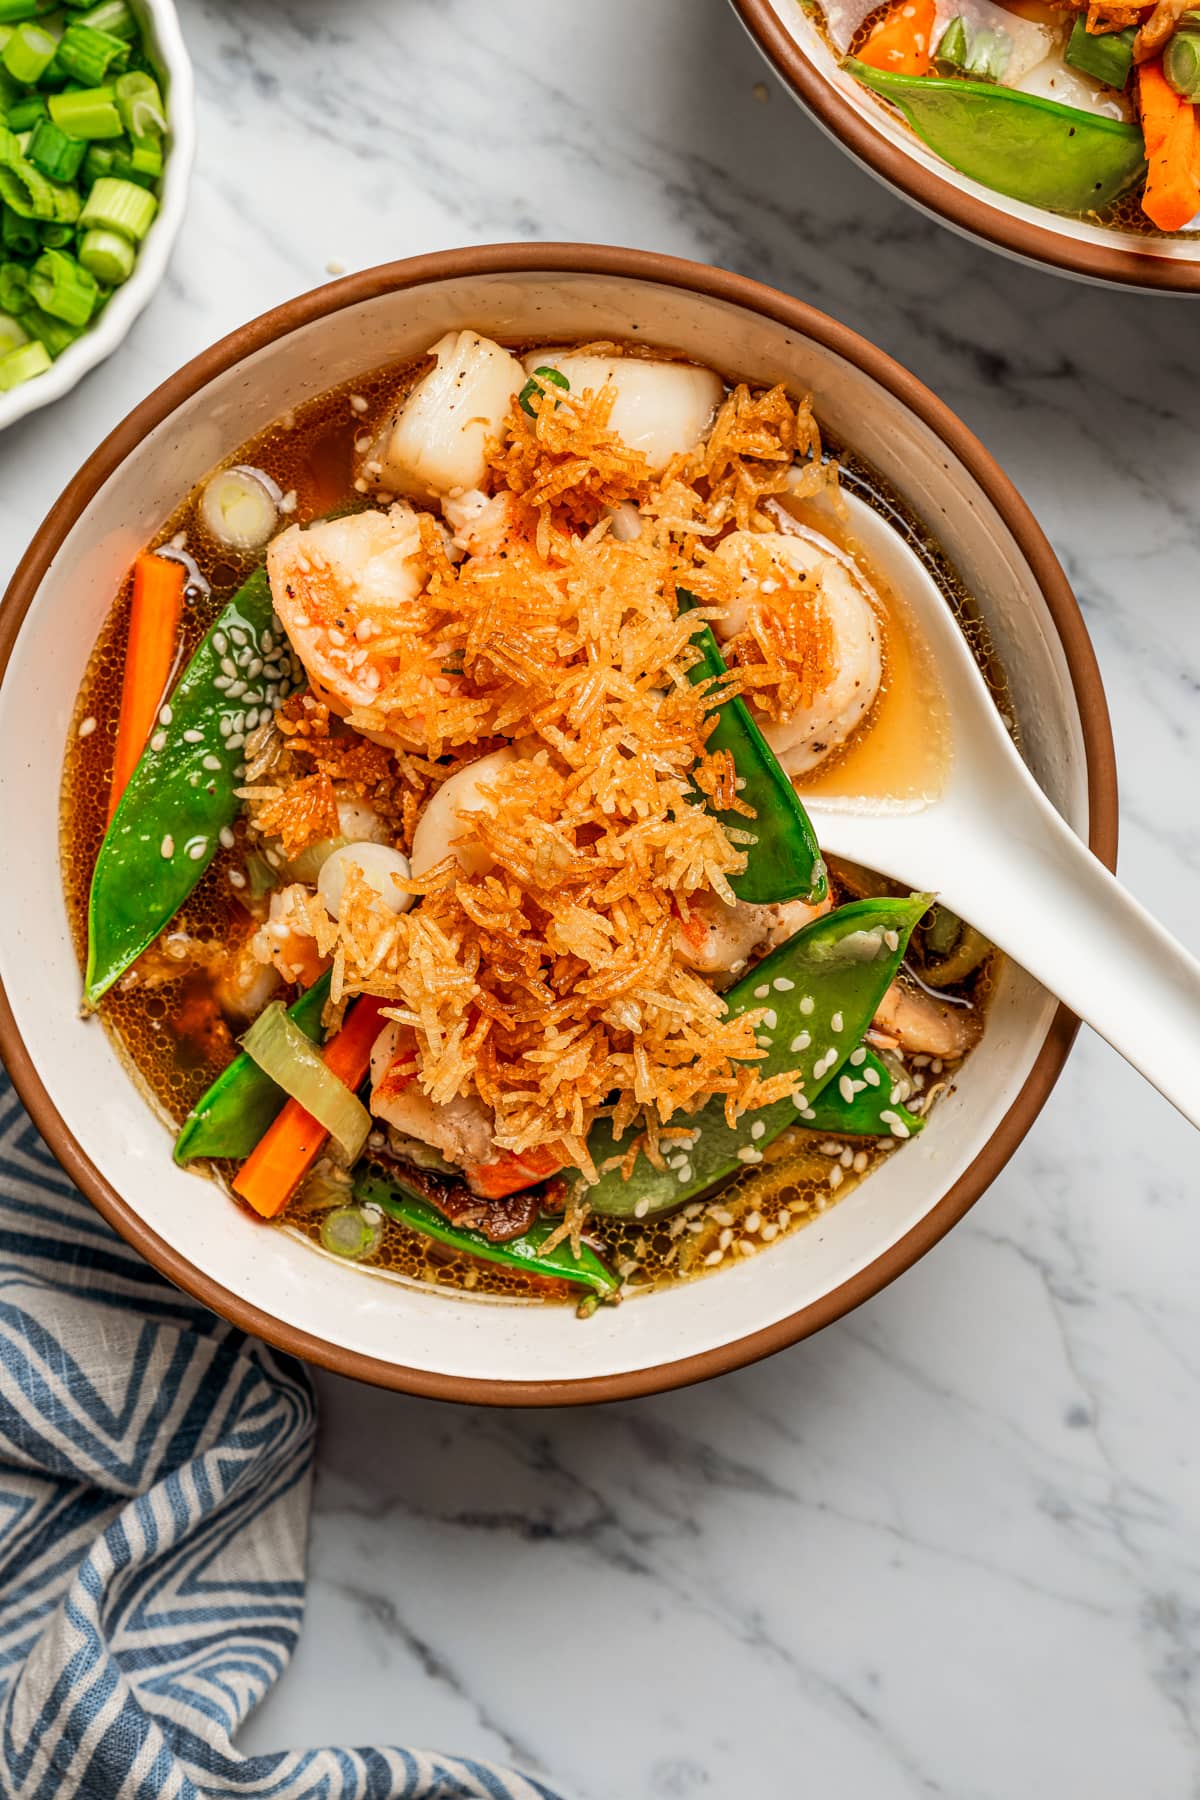 Overhead image of a soup bowl filled with broth, scallops, shrimp, and veggies, and topped with fried rice.